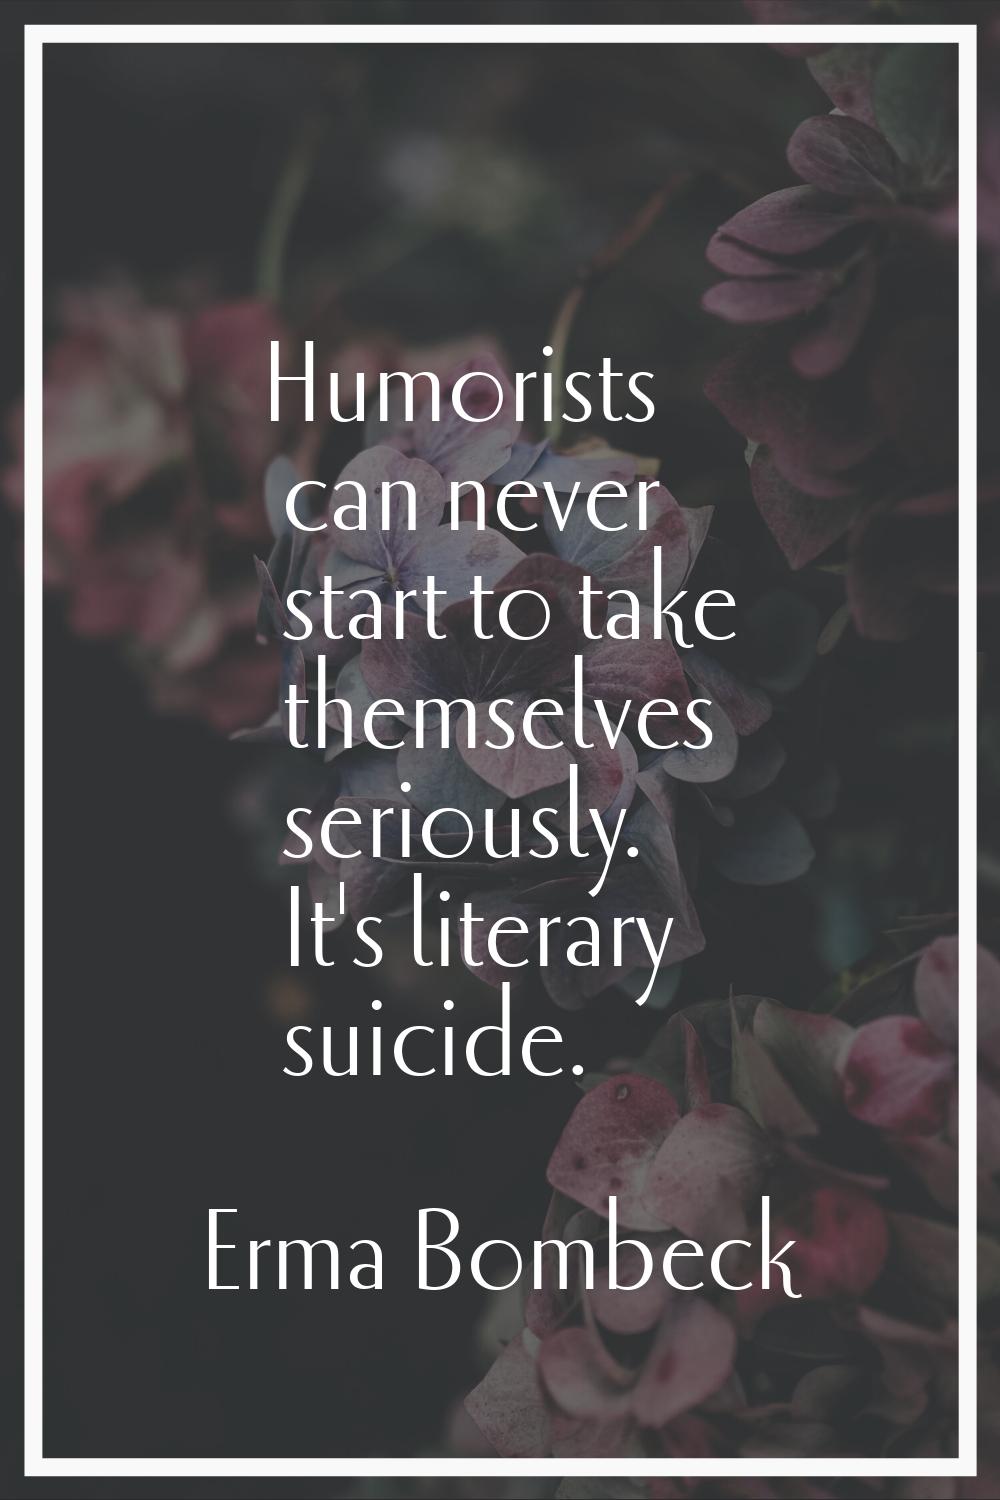 Humorists can never start to take themselves seriously. It's literary suicide.